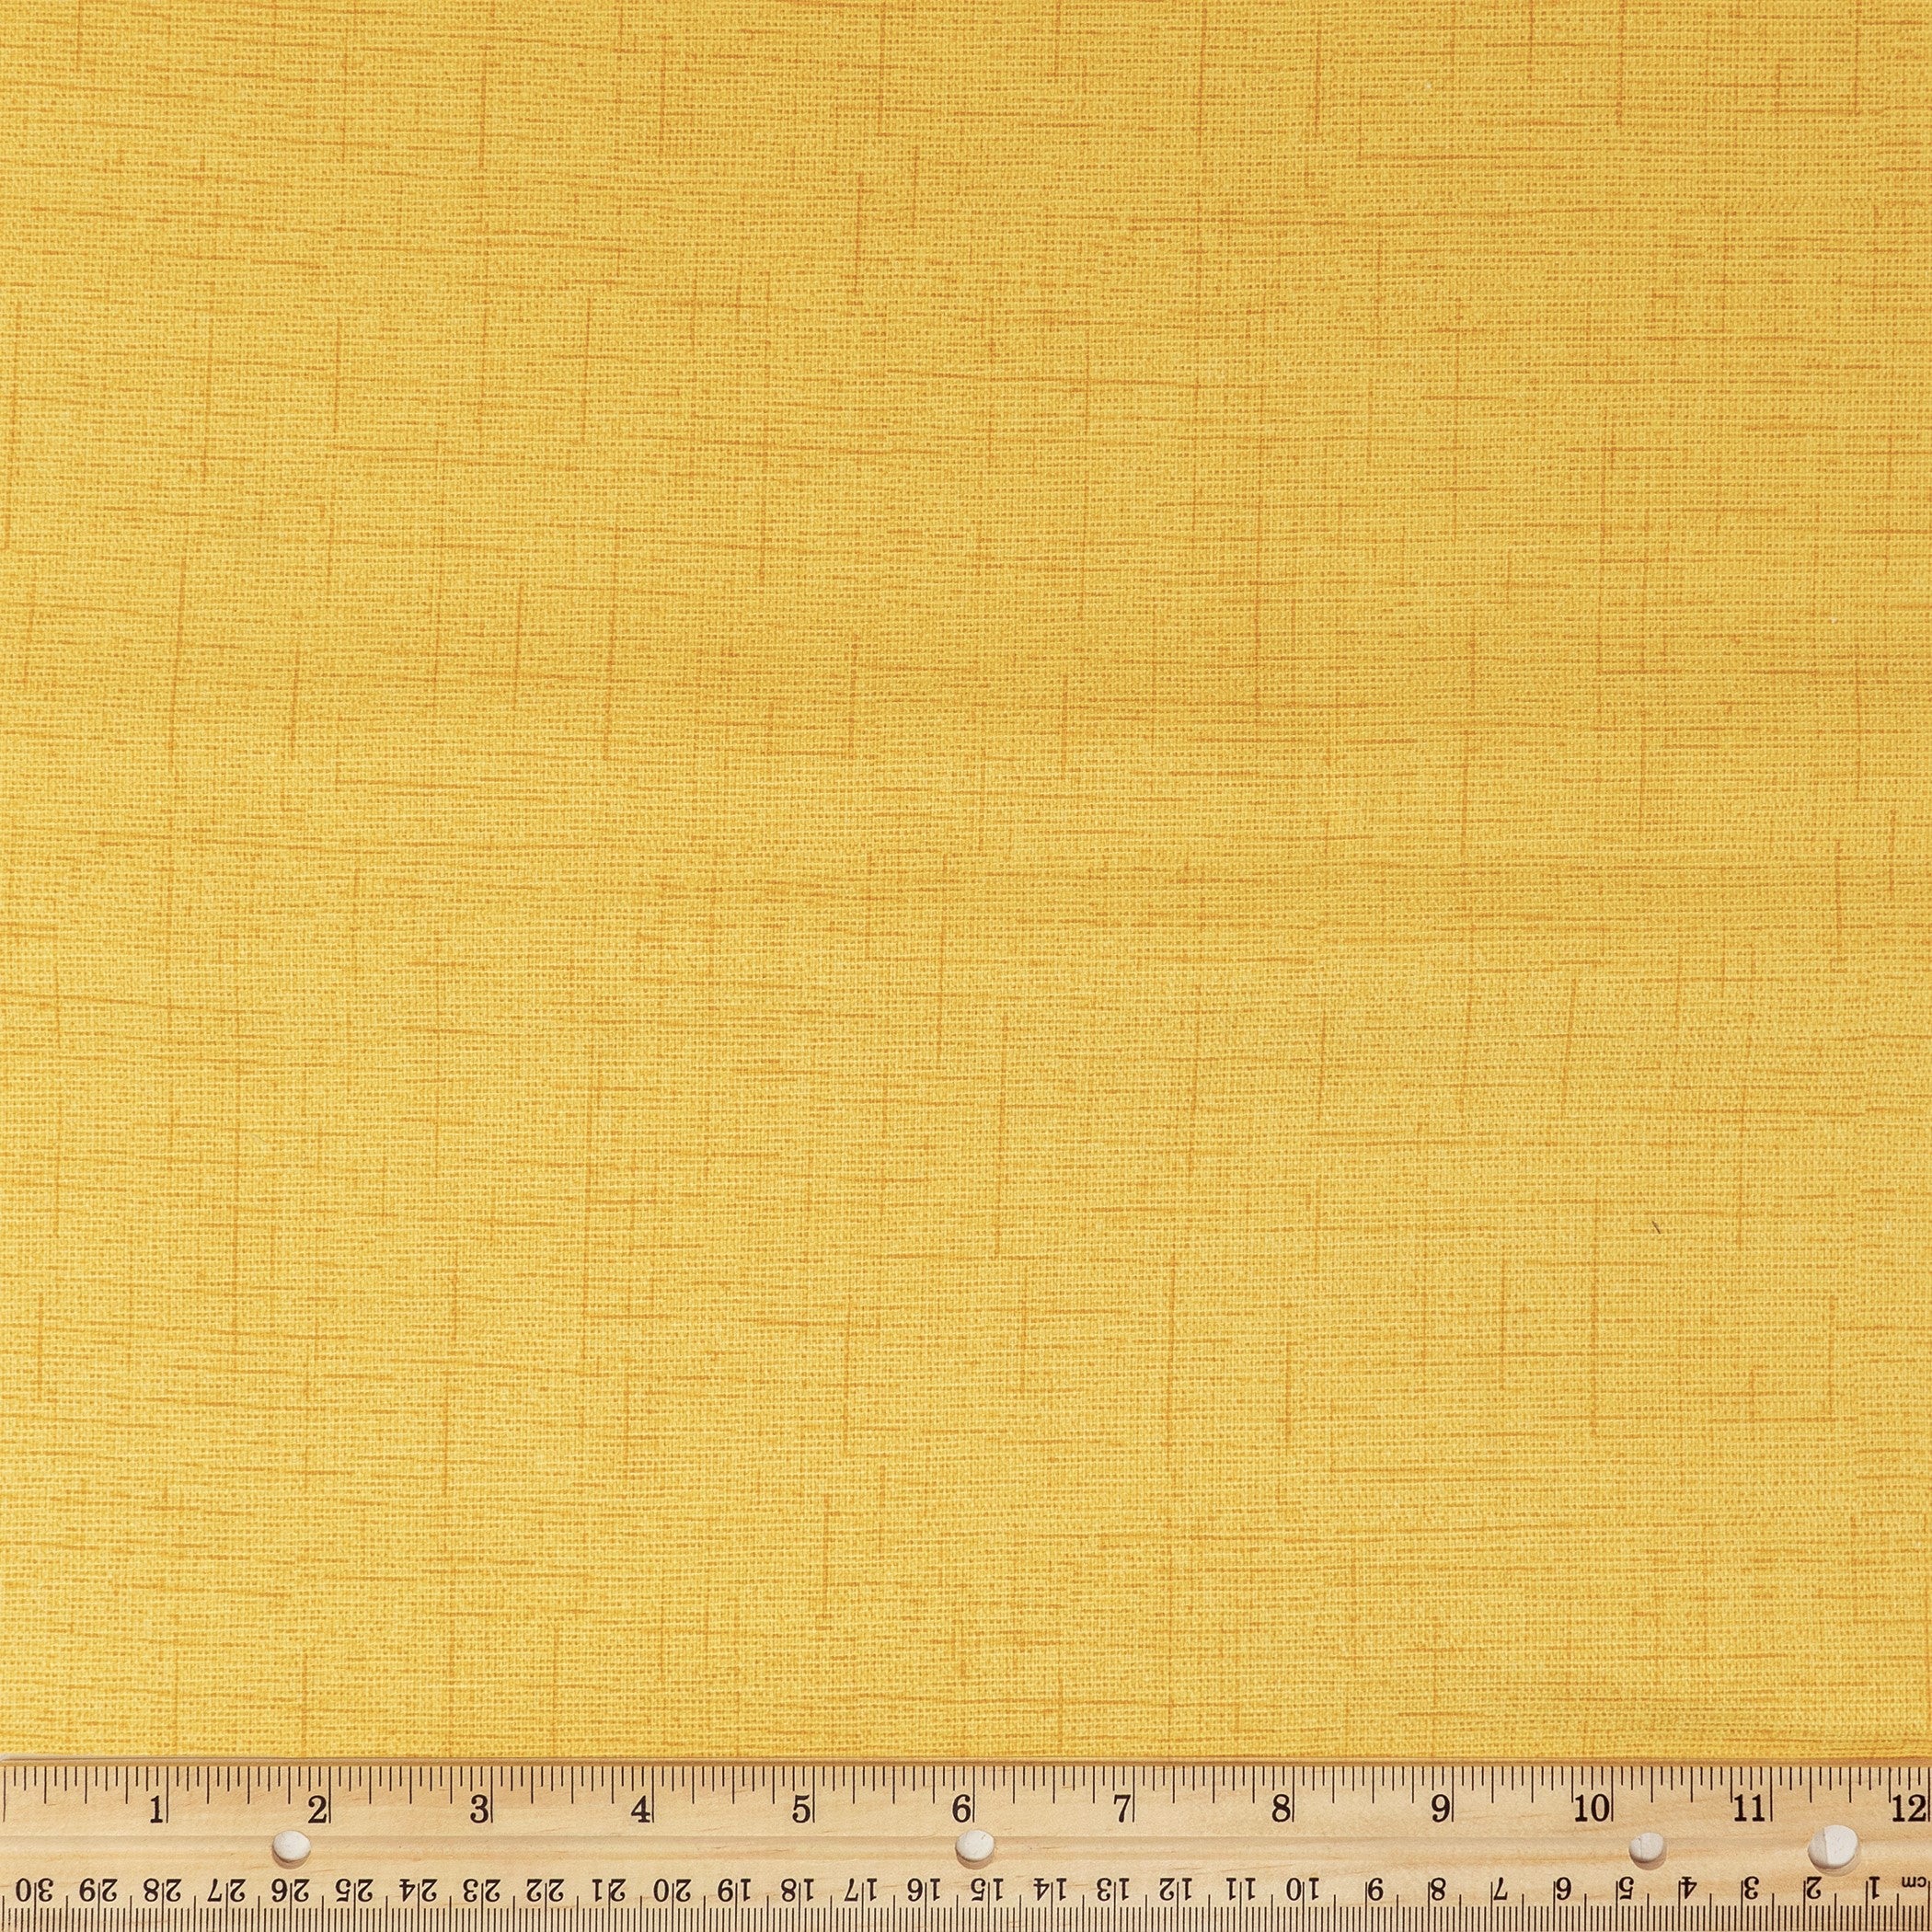 Waverly Inspirations 100% Cotton Duck 45" Width Texture Sand Color Sewing Fabric by the Yard